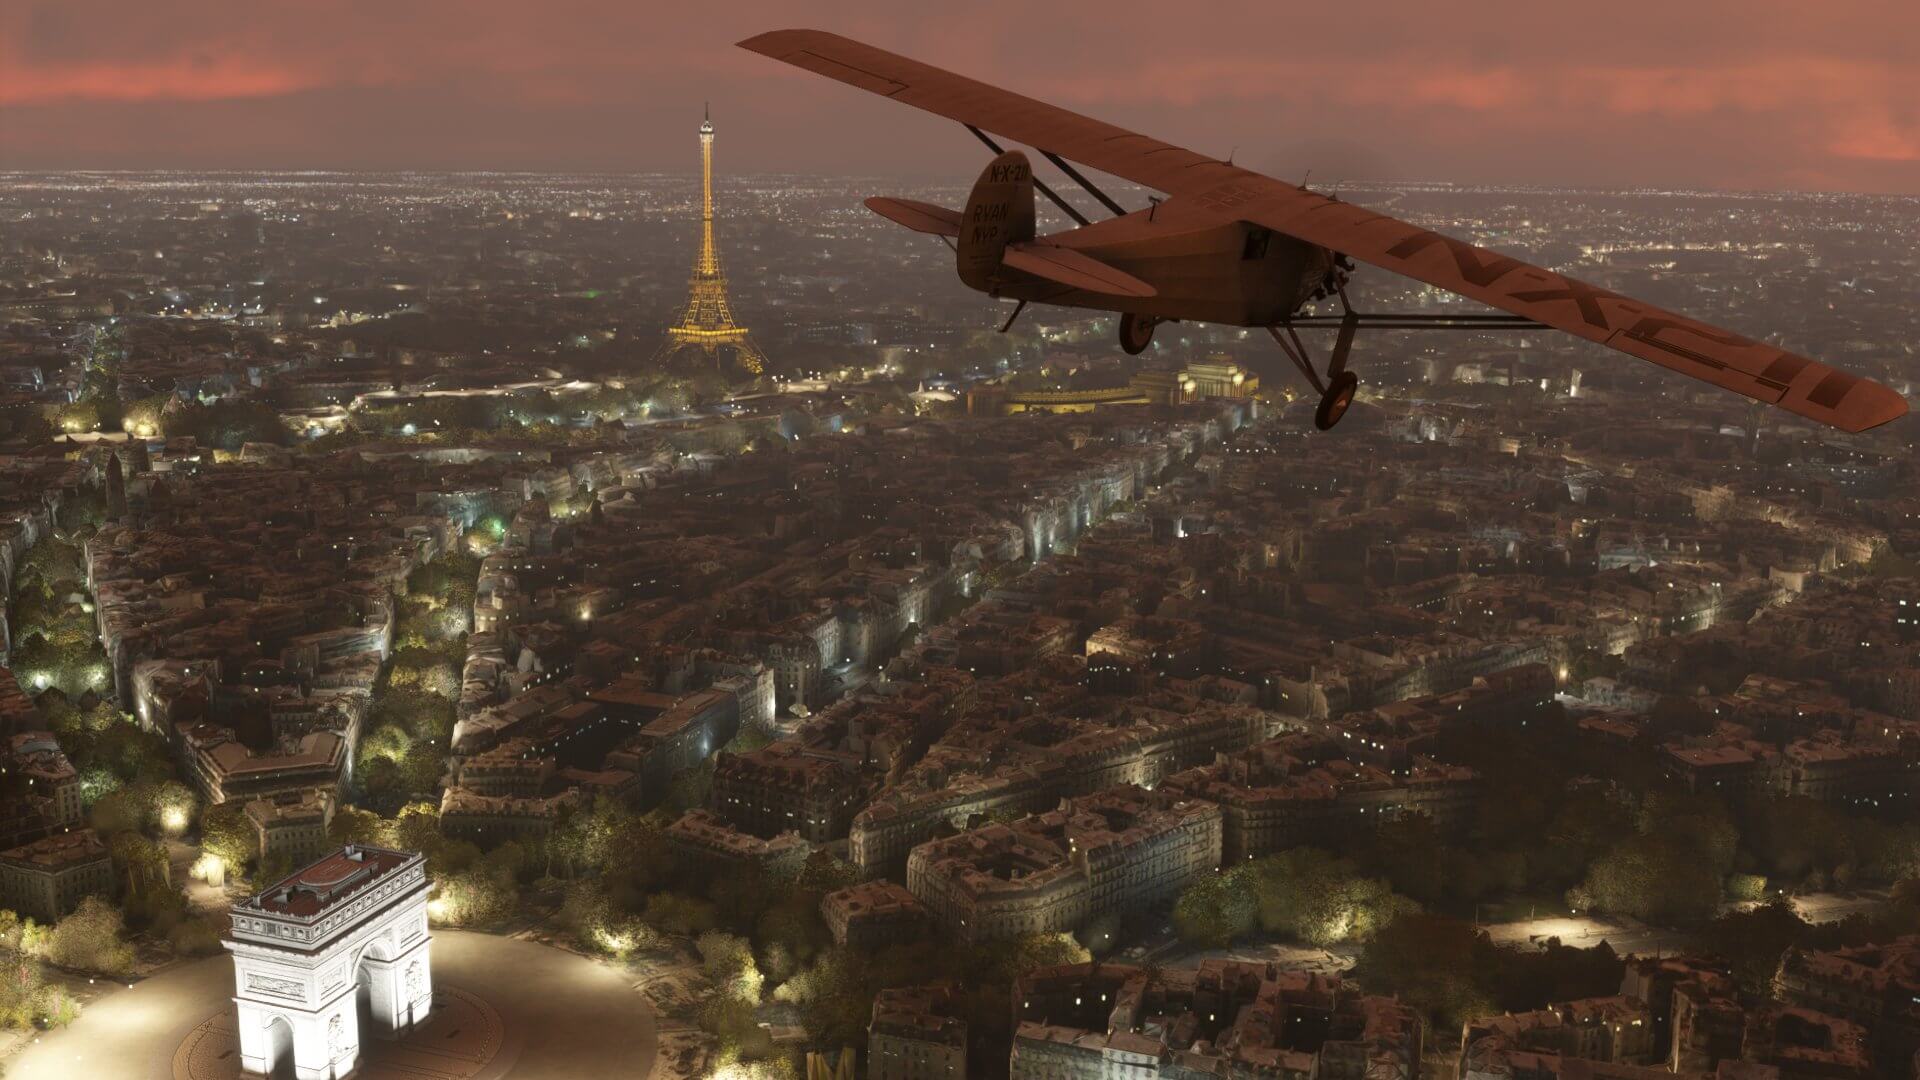 The Spirit of St. Louis aircraft banks right whilst flying low over Paris, France. The Eiffel Tower and Arc de Triomphe are lit up nearby.